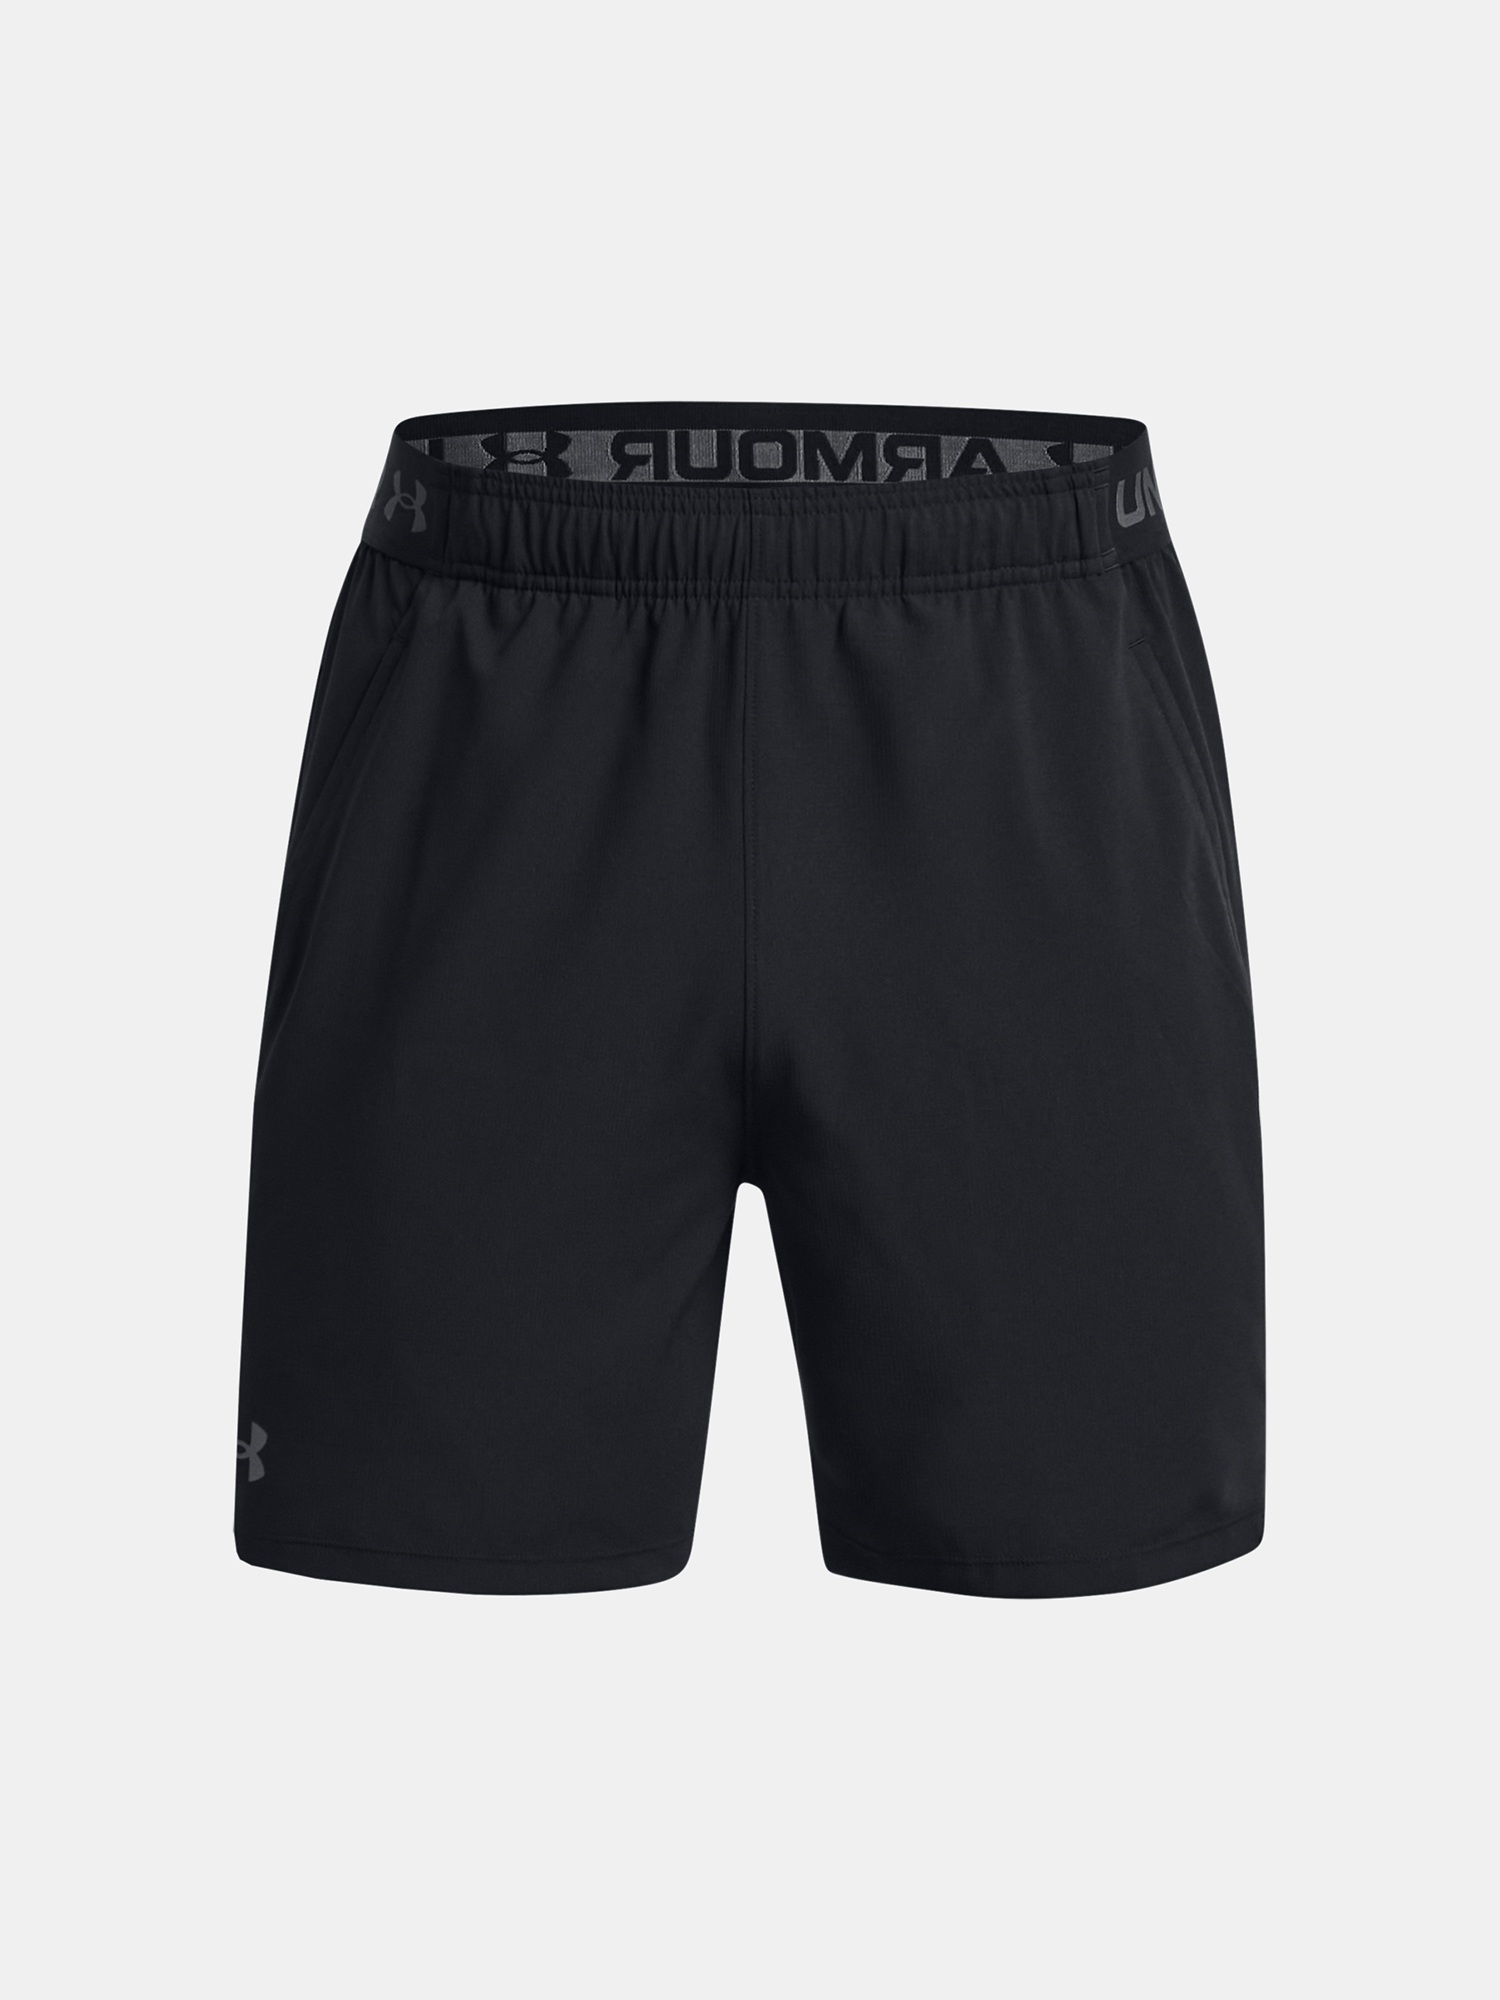 Under Armour Shorts UA Vanish Wvn 6in Grphic Sts-BLK - Men